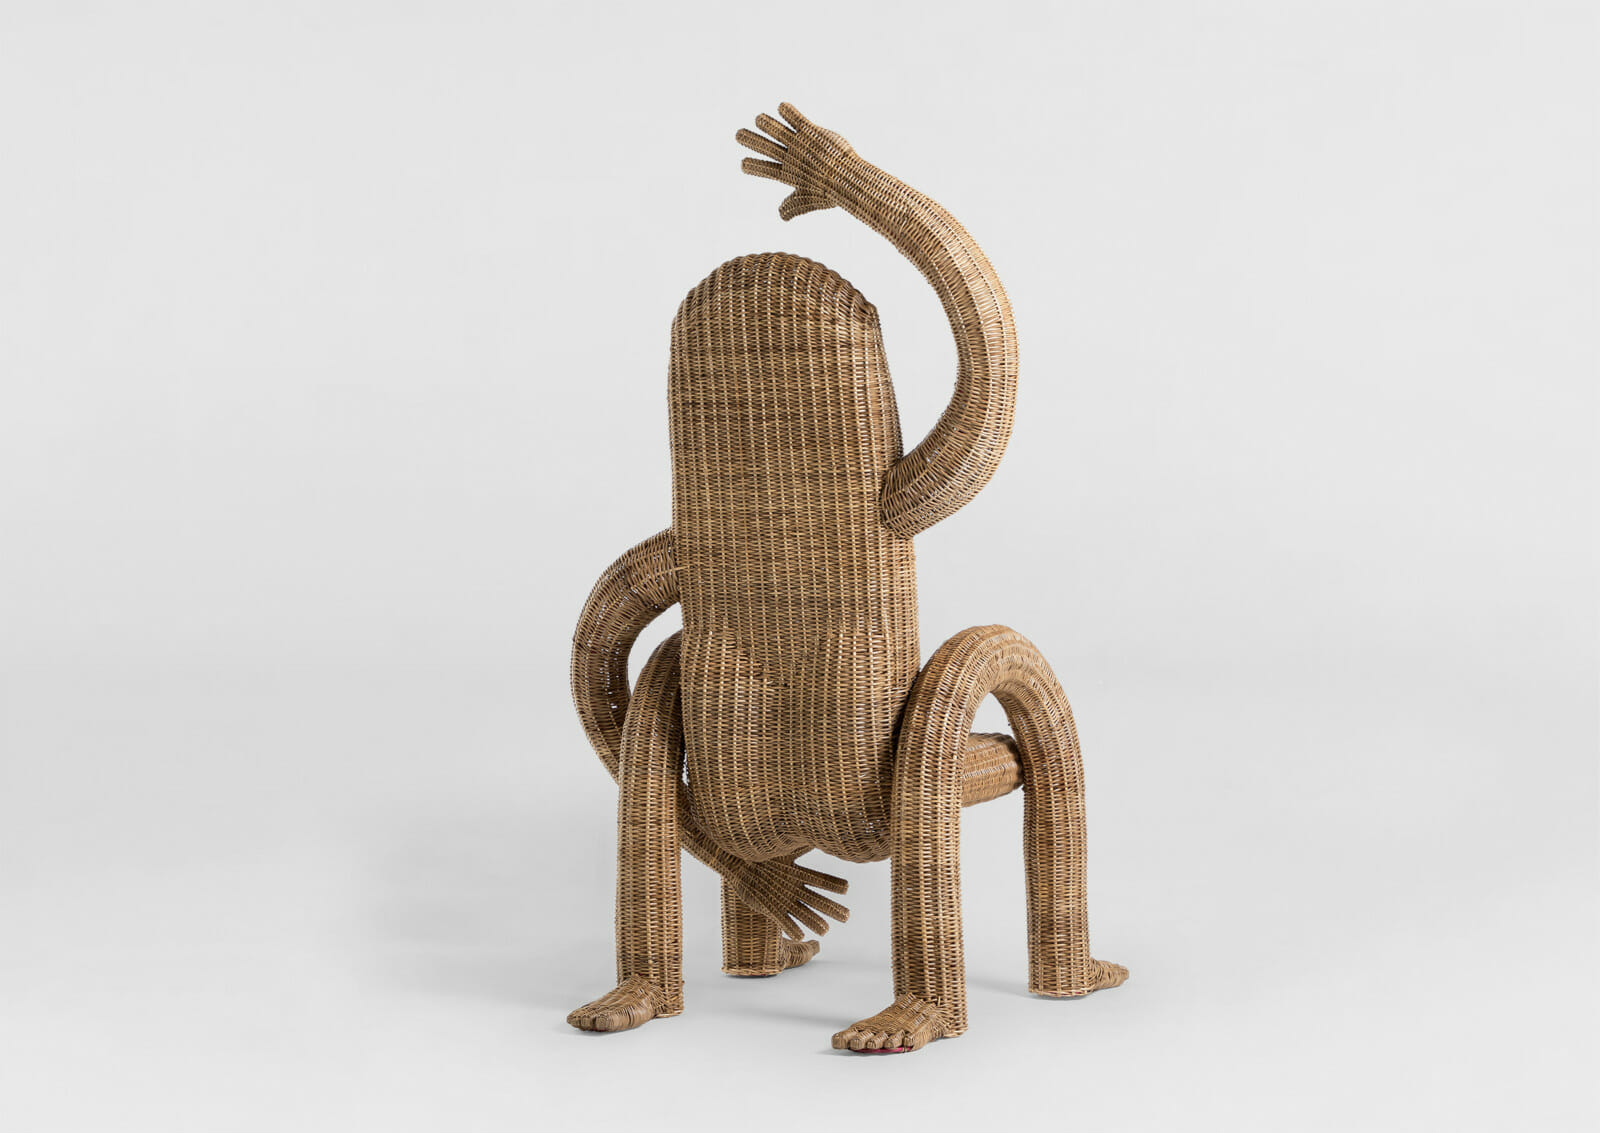 Playful Chairs Designed by Chris Wolston Impersonate the Humans Who Sit on Them